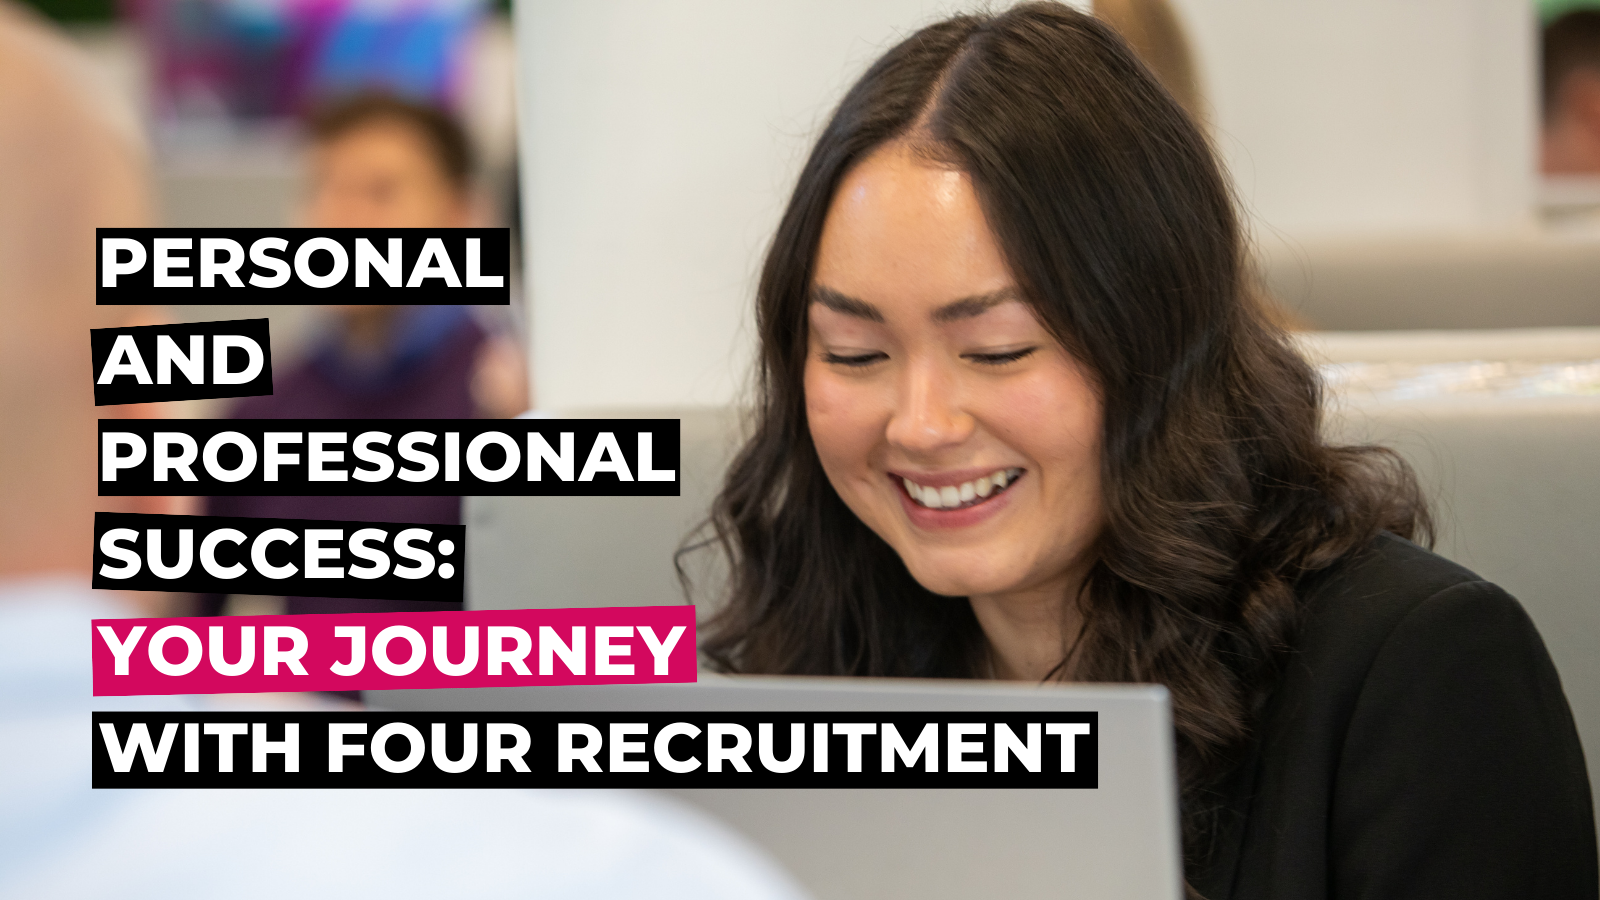 Personal and Professional Success: Your Journey with Four Recruitment